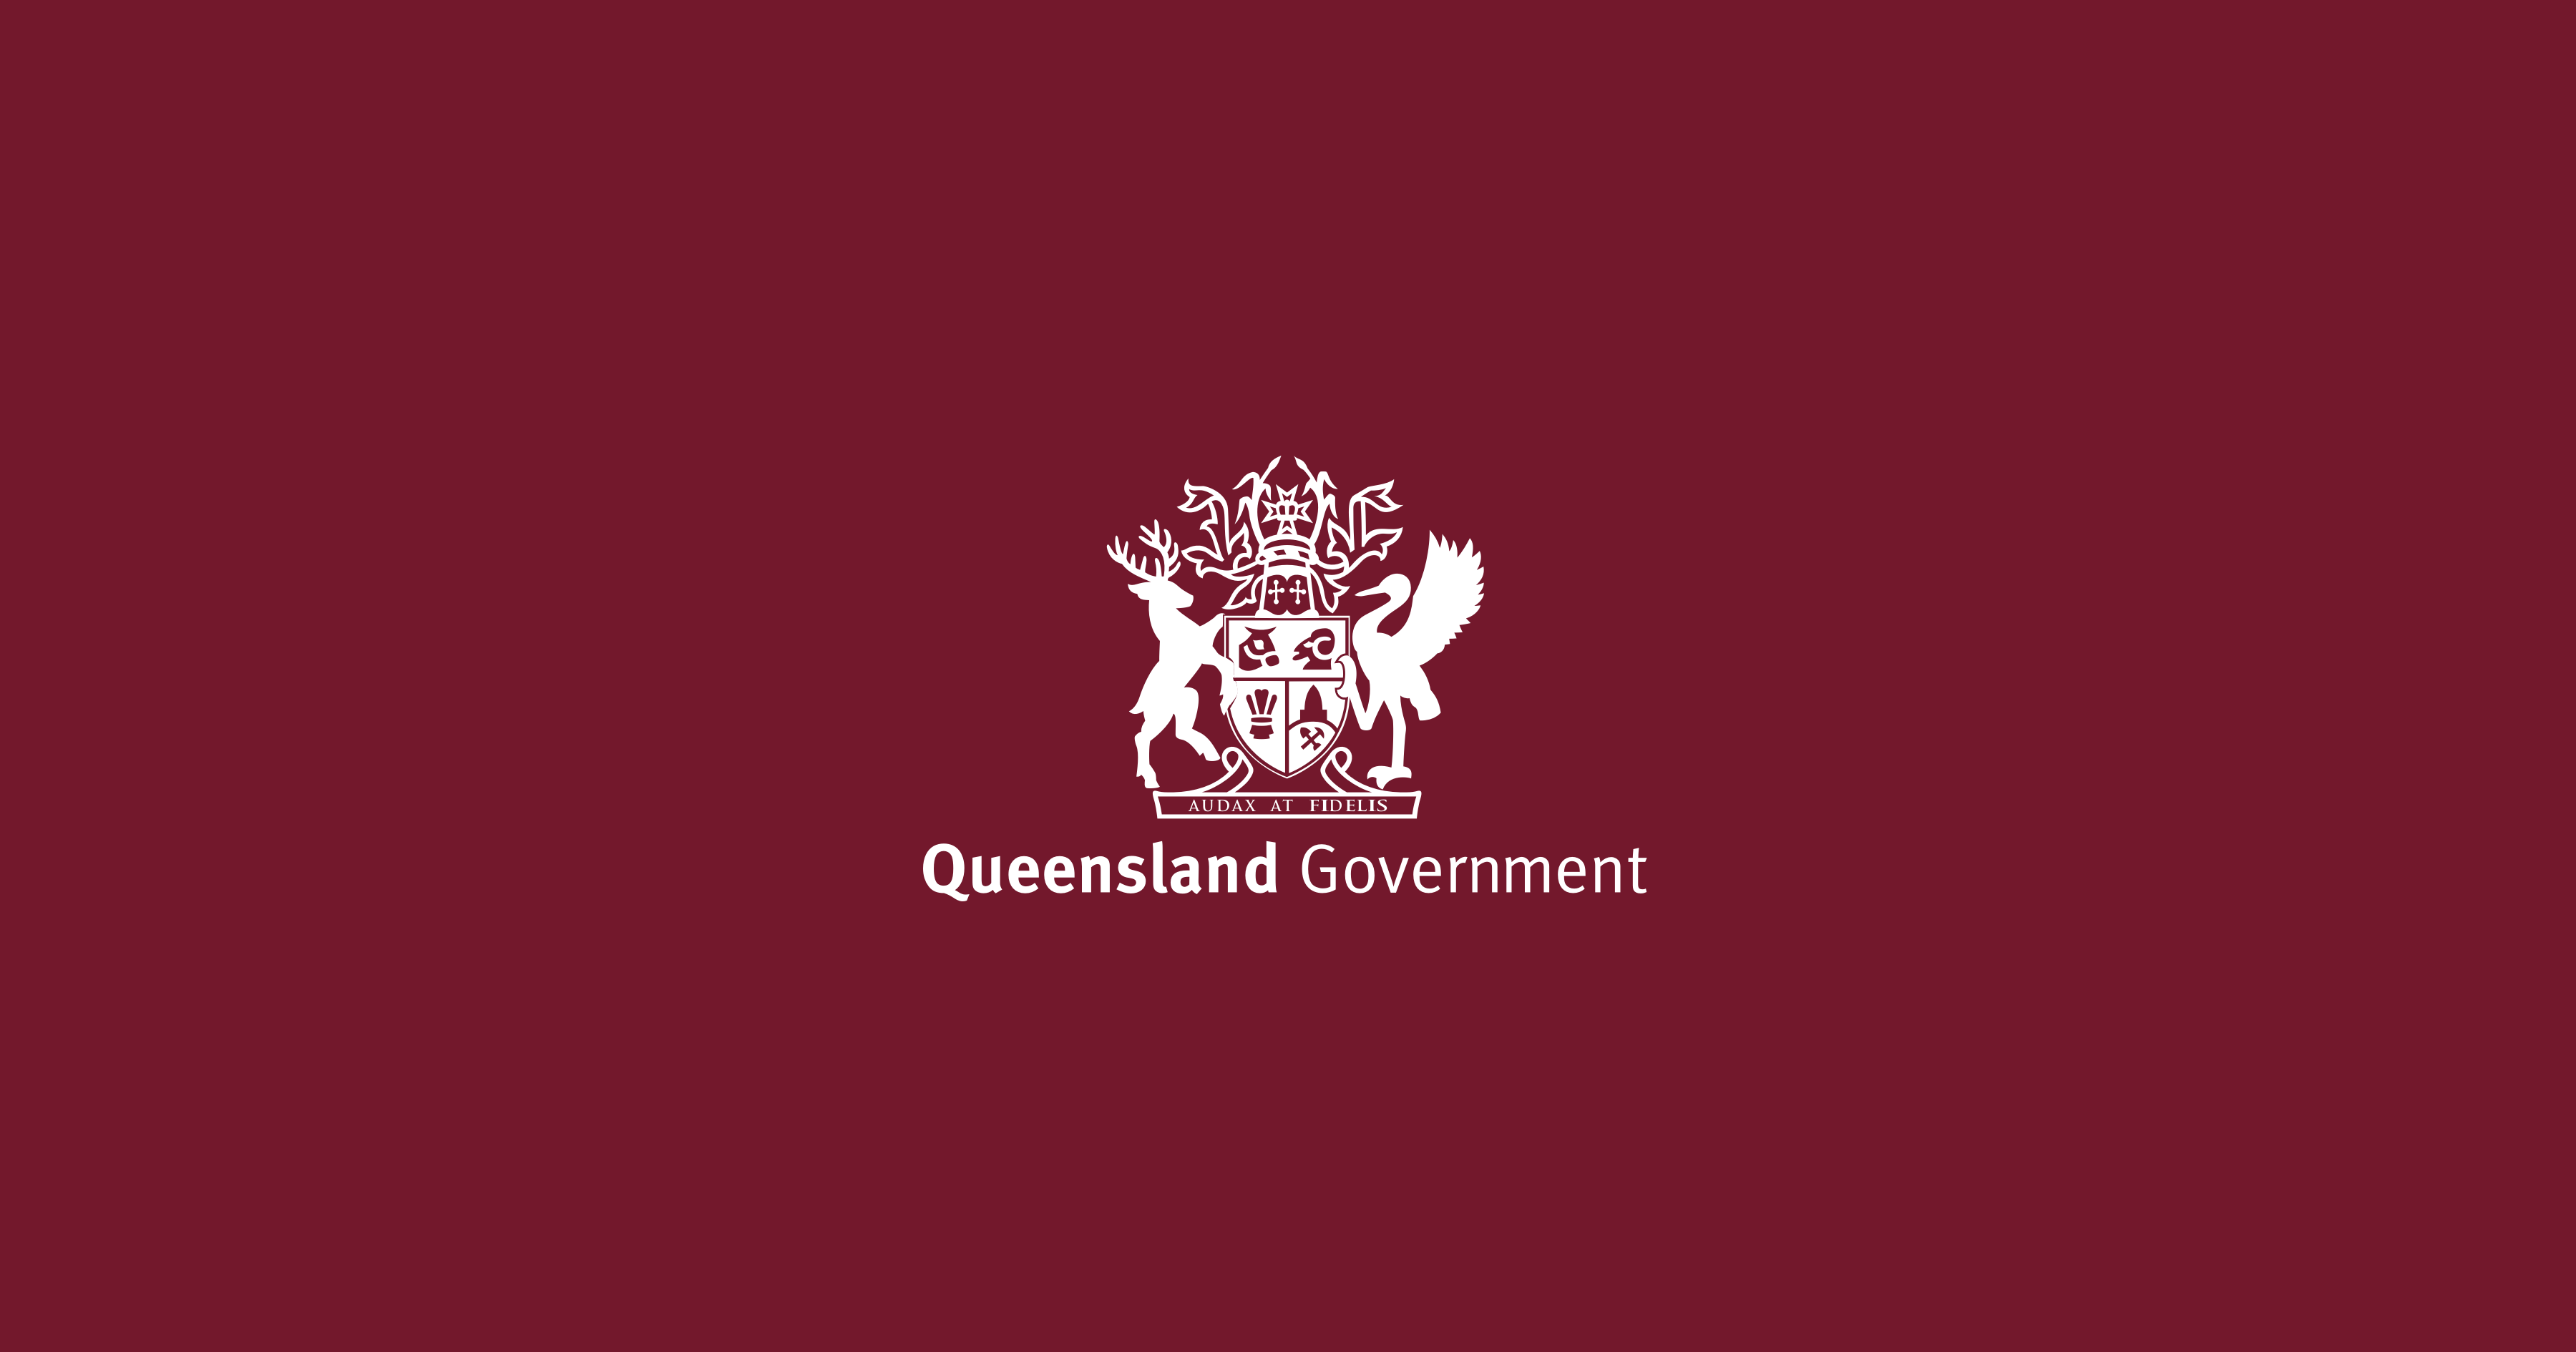 Update your address or personal details on your licence | Transport and motoring | Queensland Government